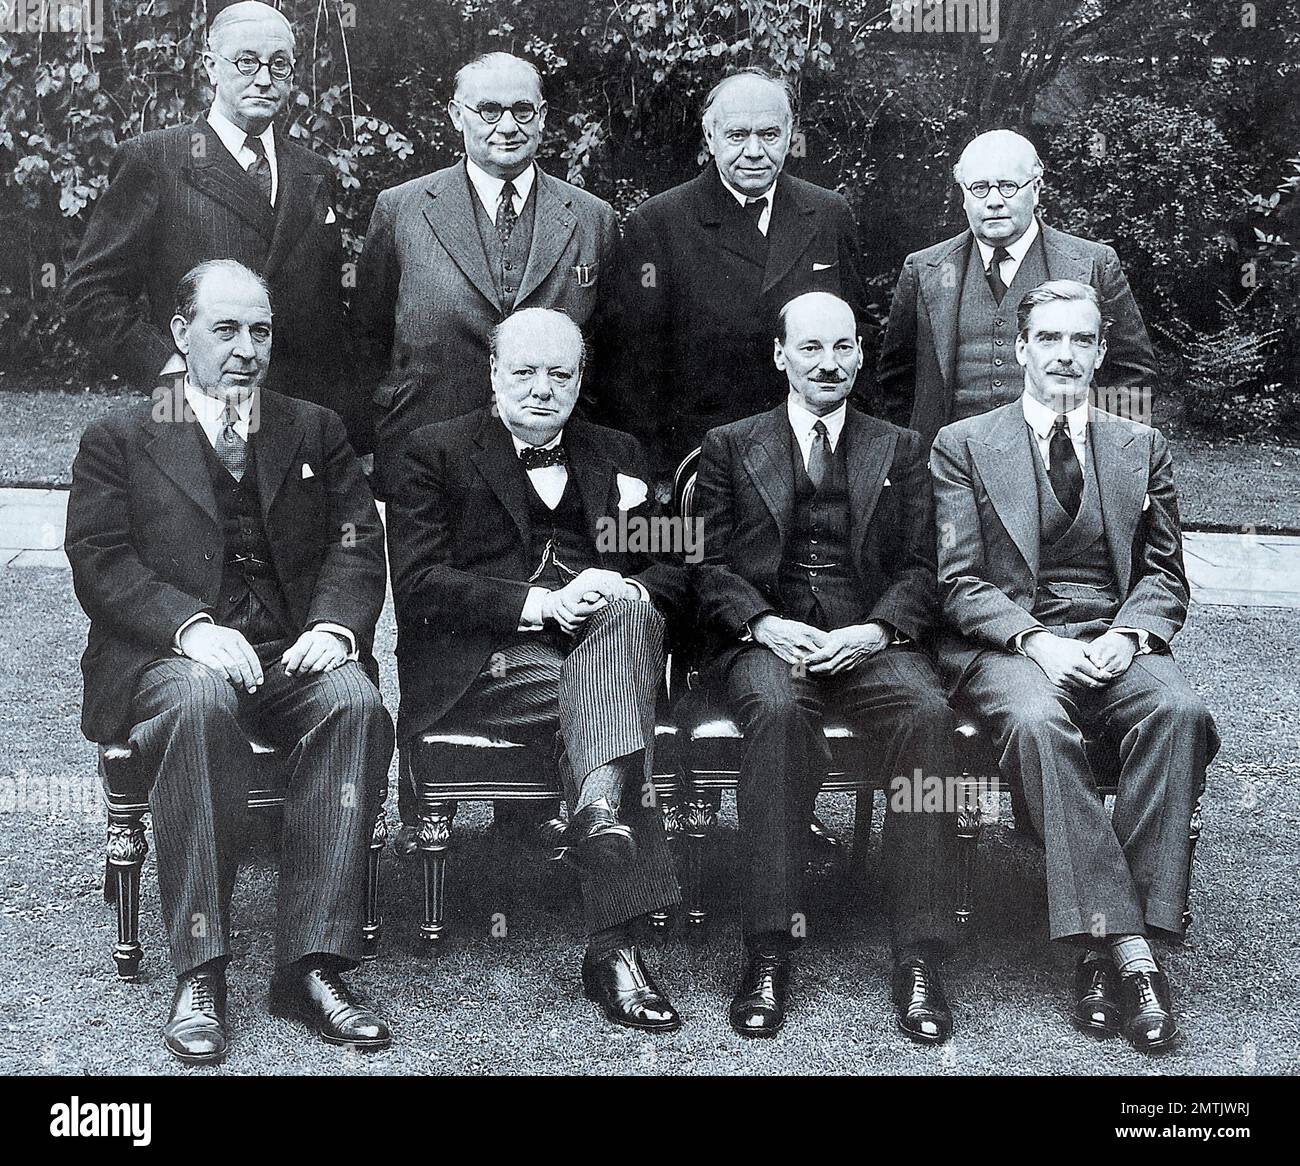 BRITISH WAR CABINET in the grounds of No 10 Downing Street, October,1941. From left - back row Arthur Greenwood (Minister without Portfolio), Ernest Bevin (Minister of Labour), Lord Beaverbrook (Minister of Supply), Sir Kingsley Wood (Chancellor of the Exchequer. Front row - from left: Sir John Anderson (Lord President of the Council),Winston Churchill (Prime Minister)) , Clement Attlee (Lord Privy Seal), Anthony Eden (Foreign Secretary) Stock Photo